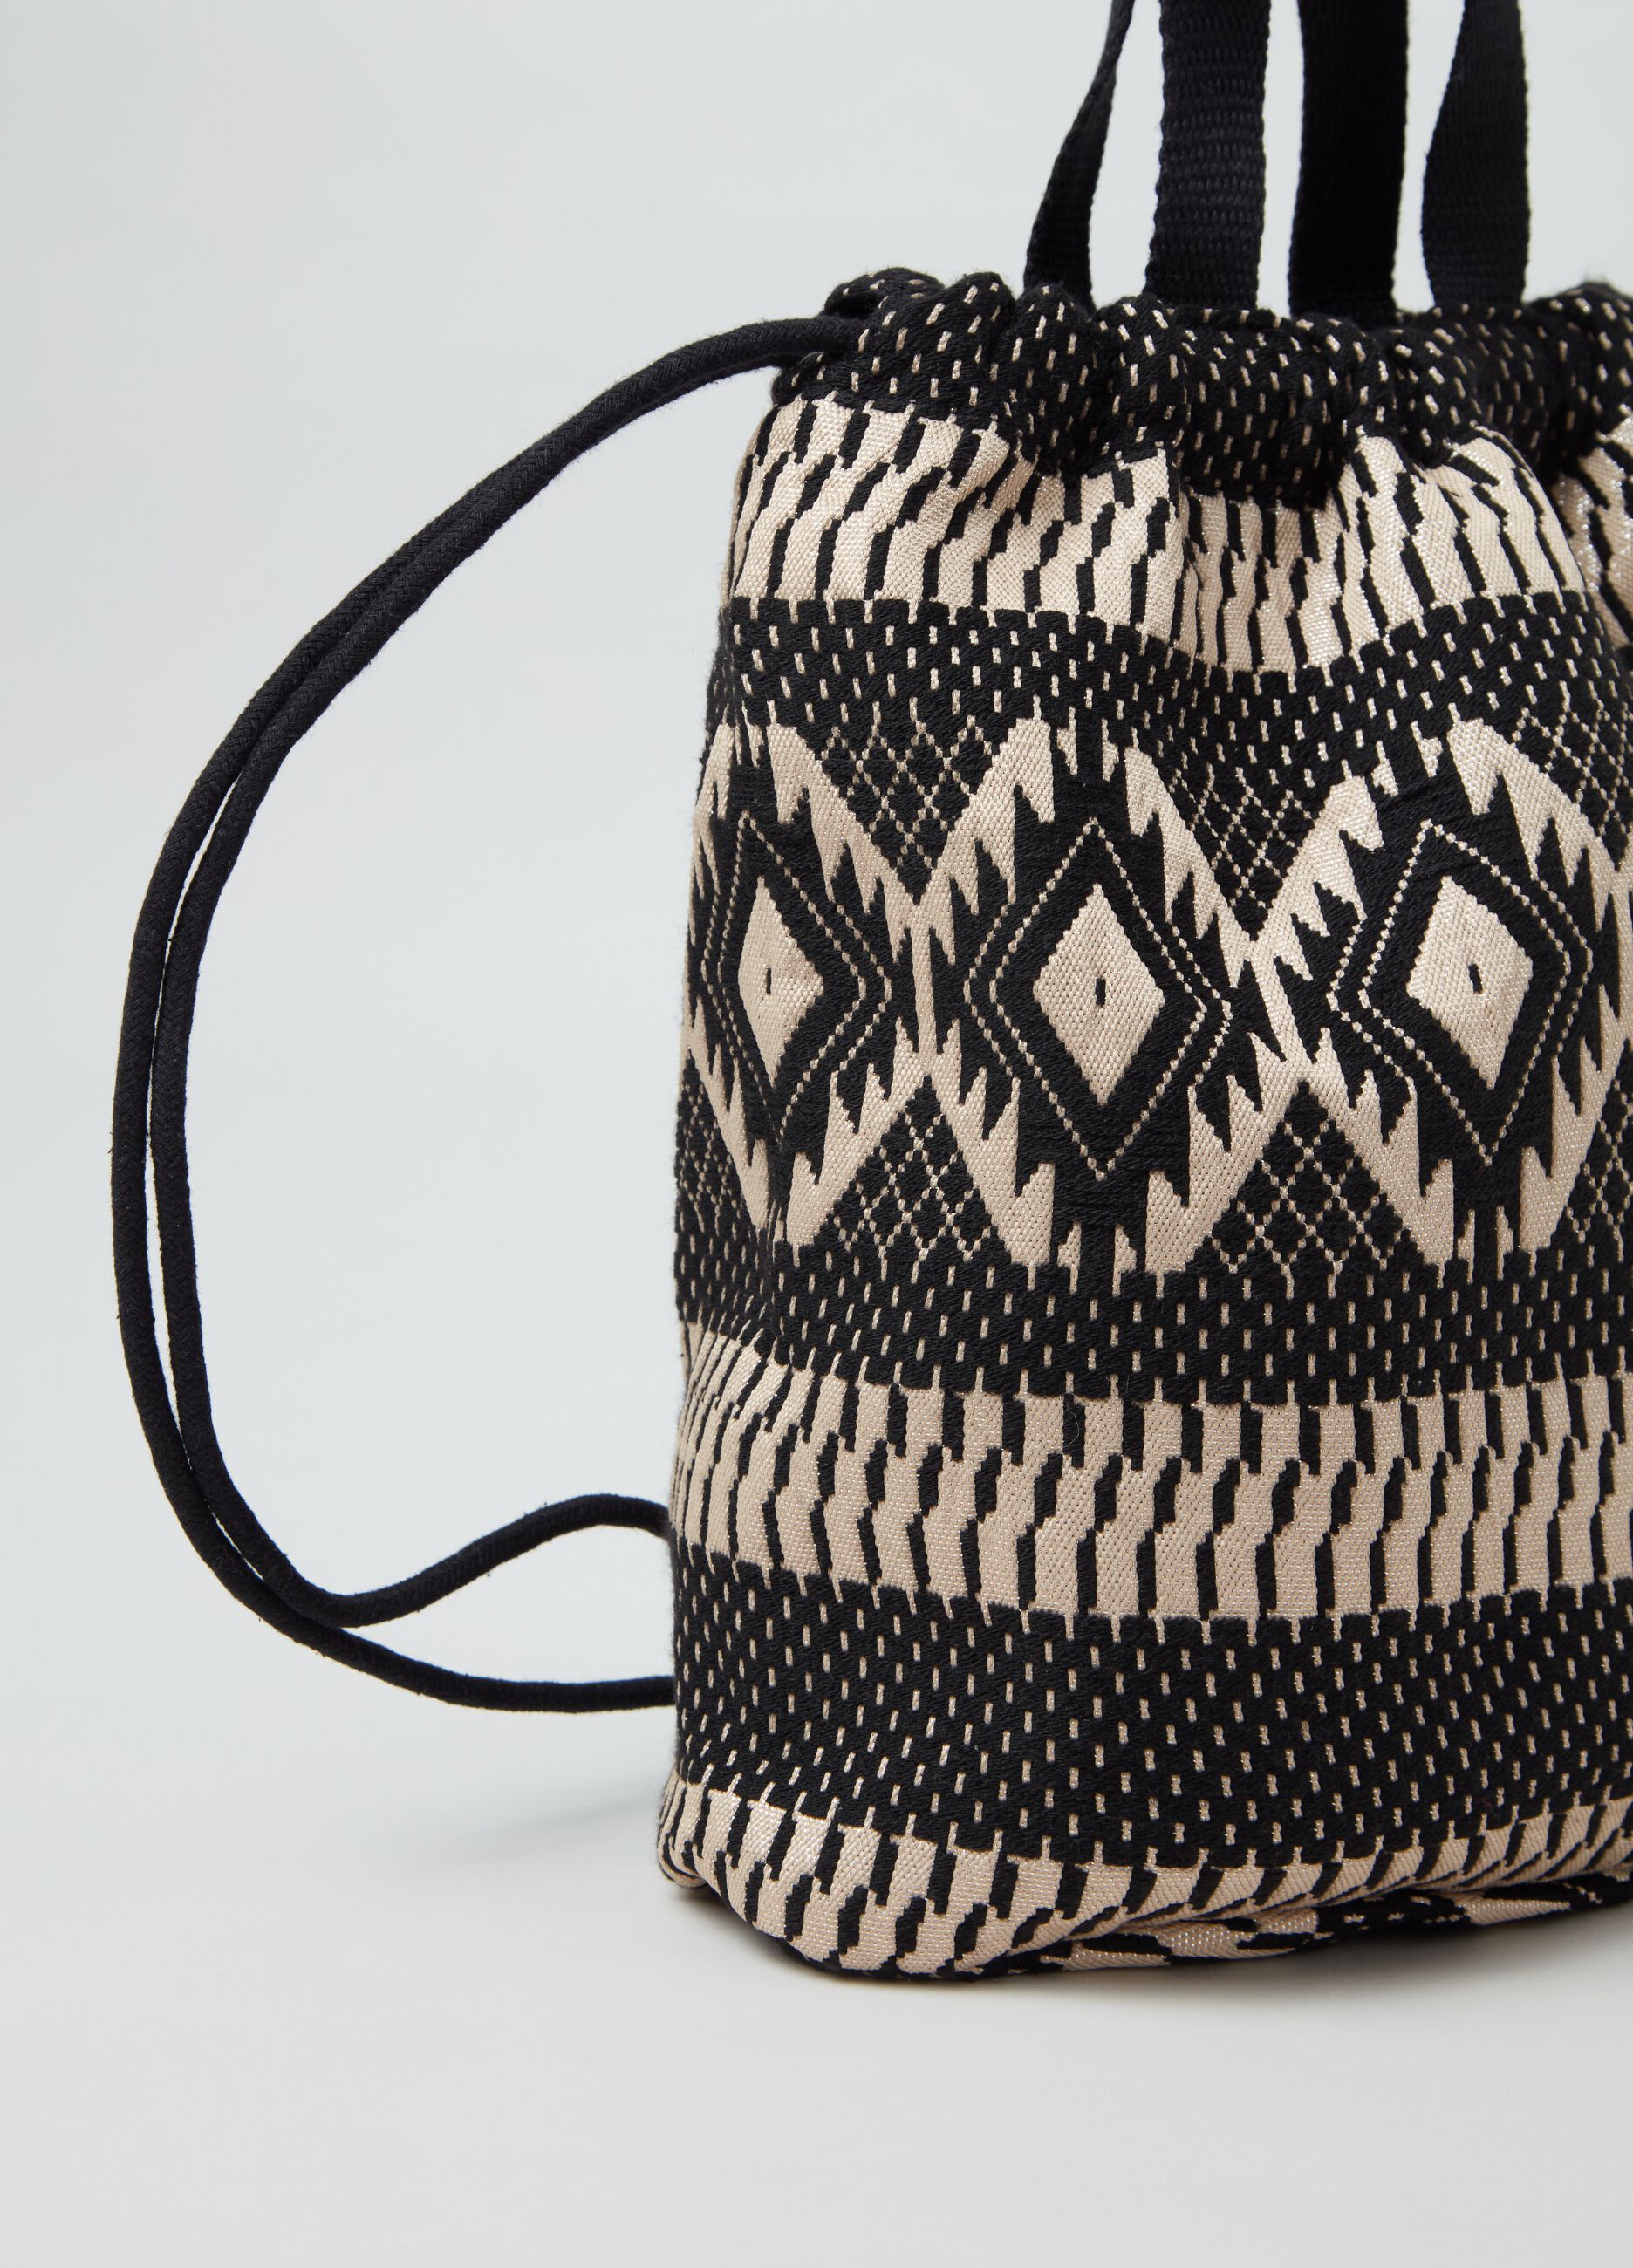 Cotton sack backpack with ethnic pattern